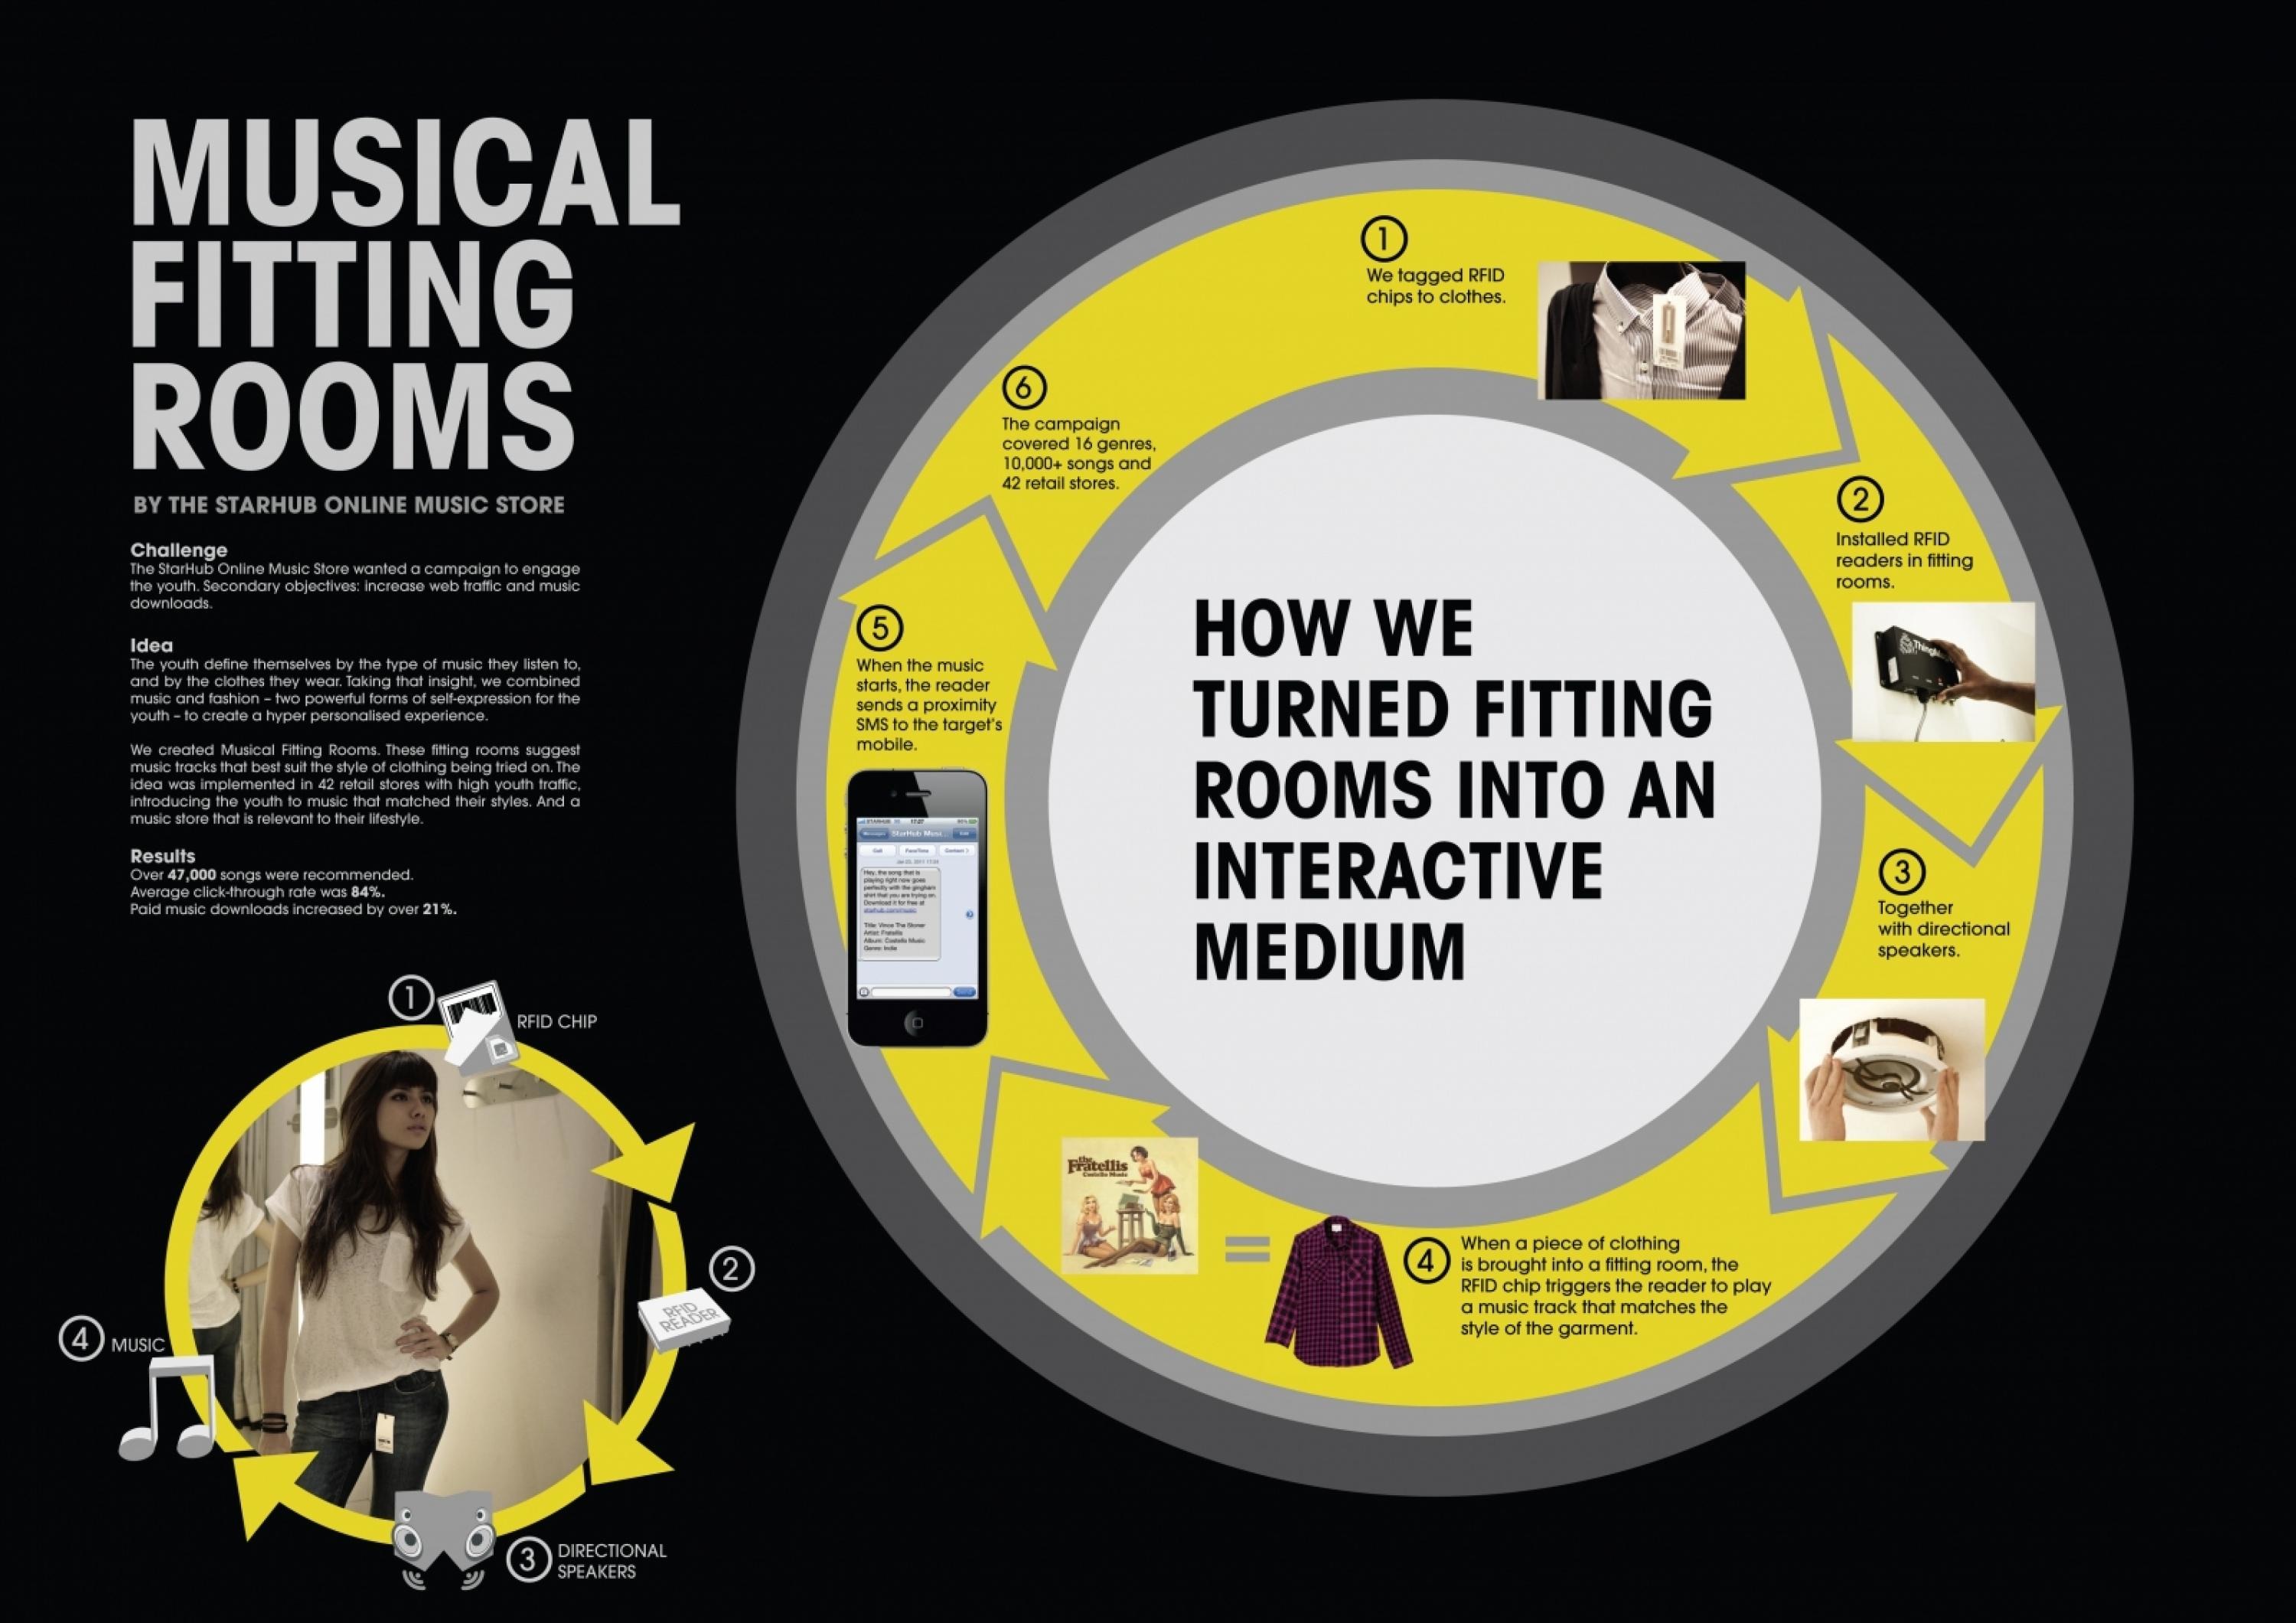 MUSICAL FITTING ROOMS